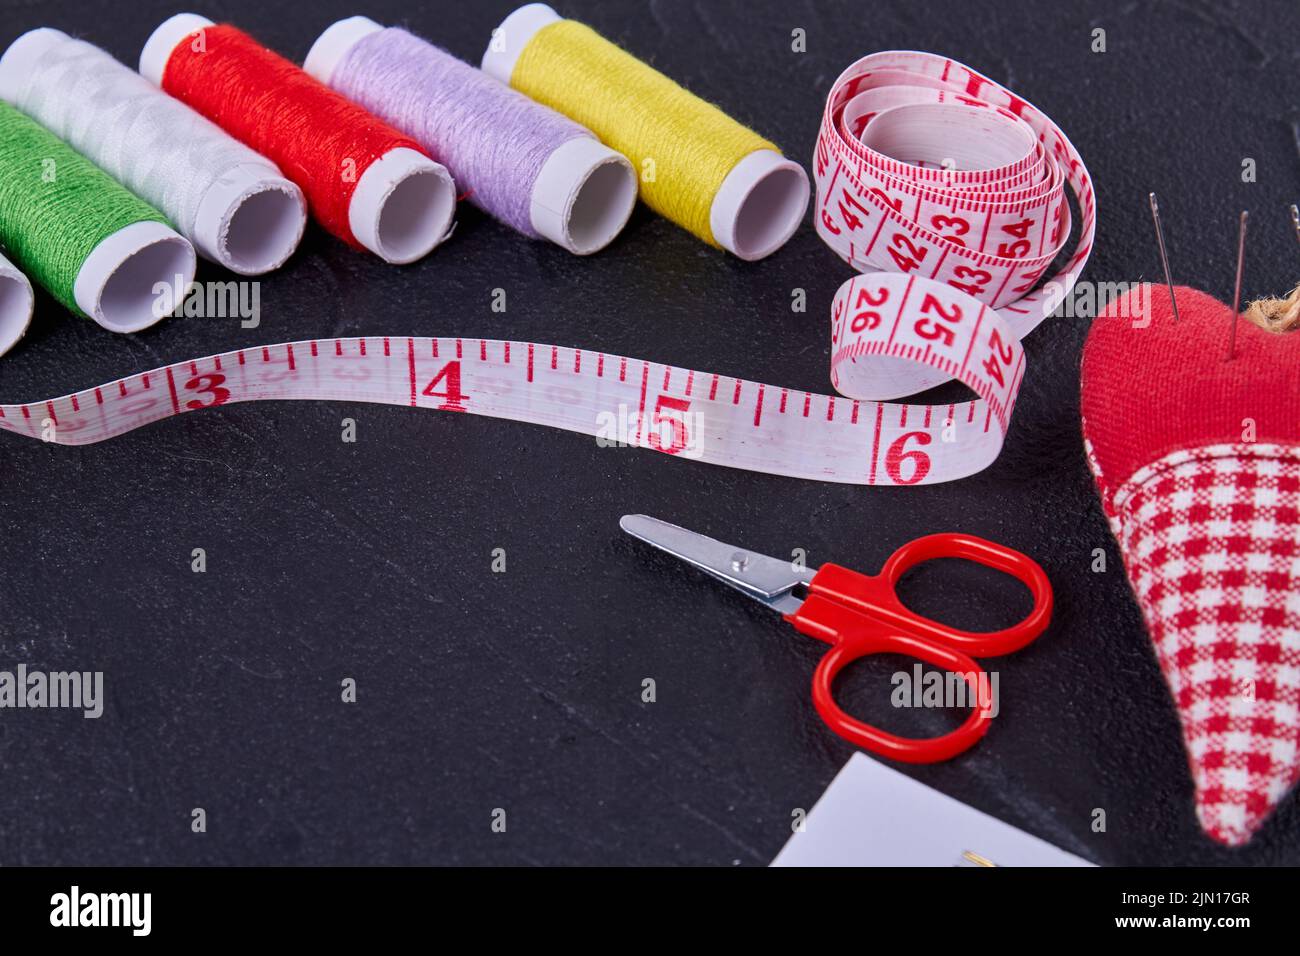 Close up set of sewing accessories on dark surface. Threads with measure tape and scissors. Stock Photo